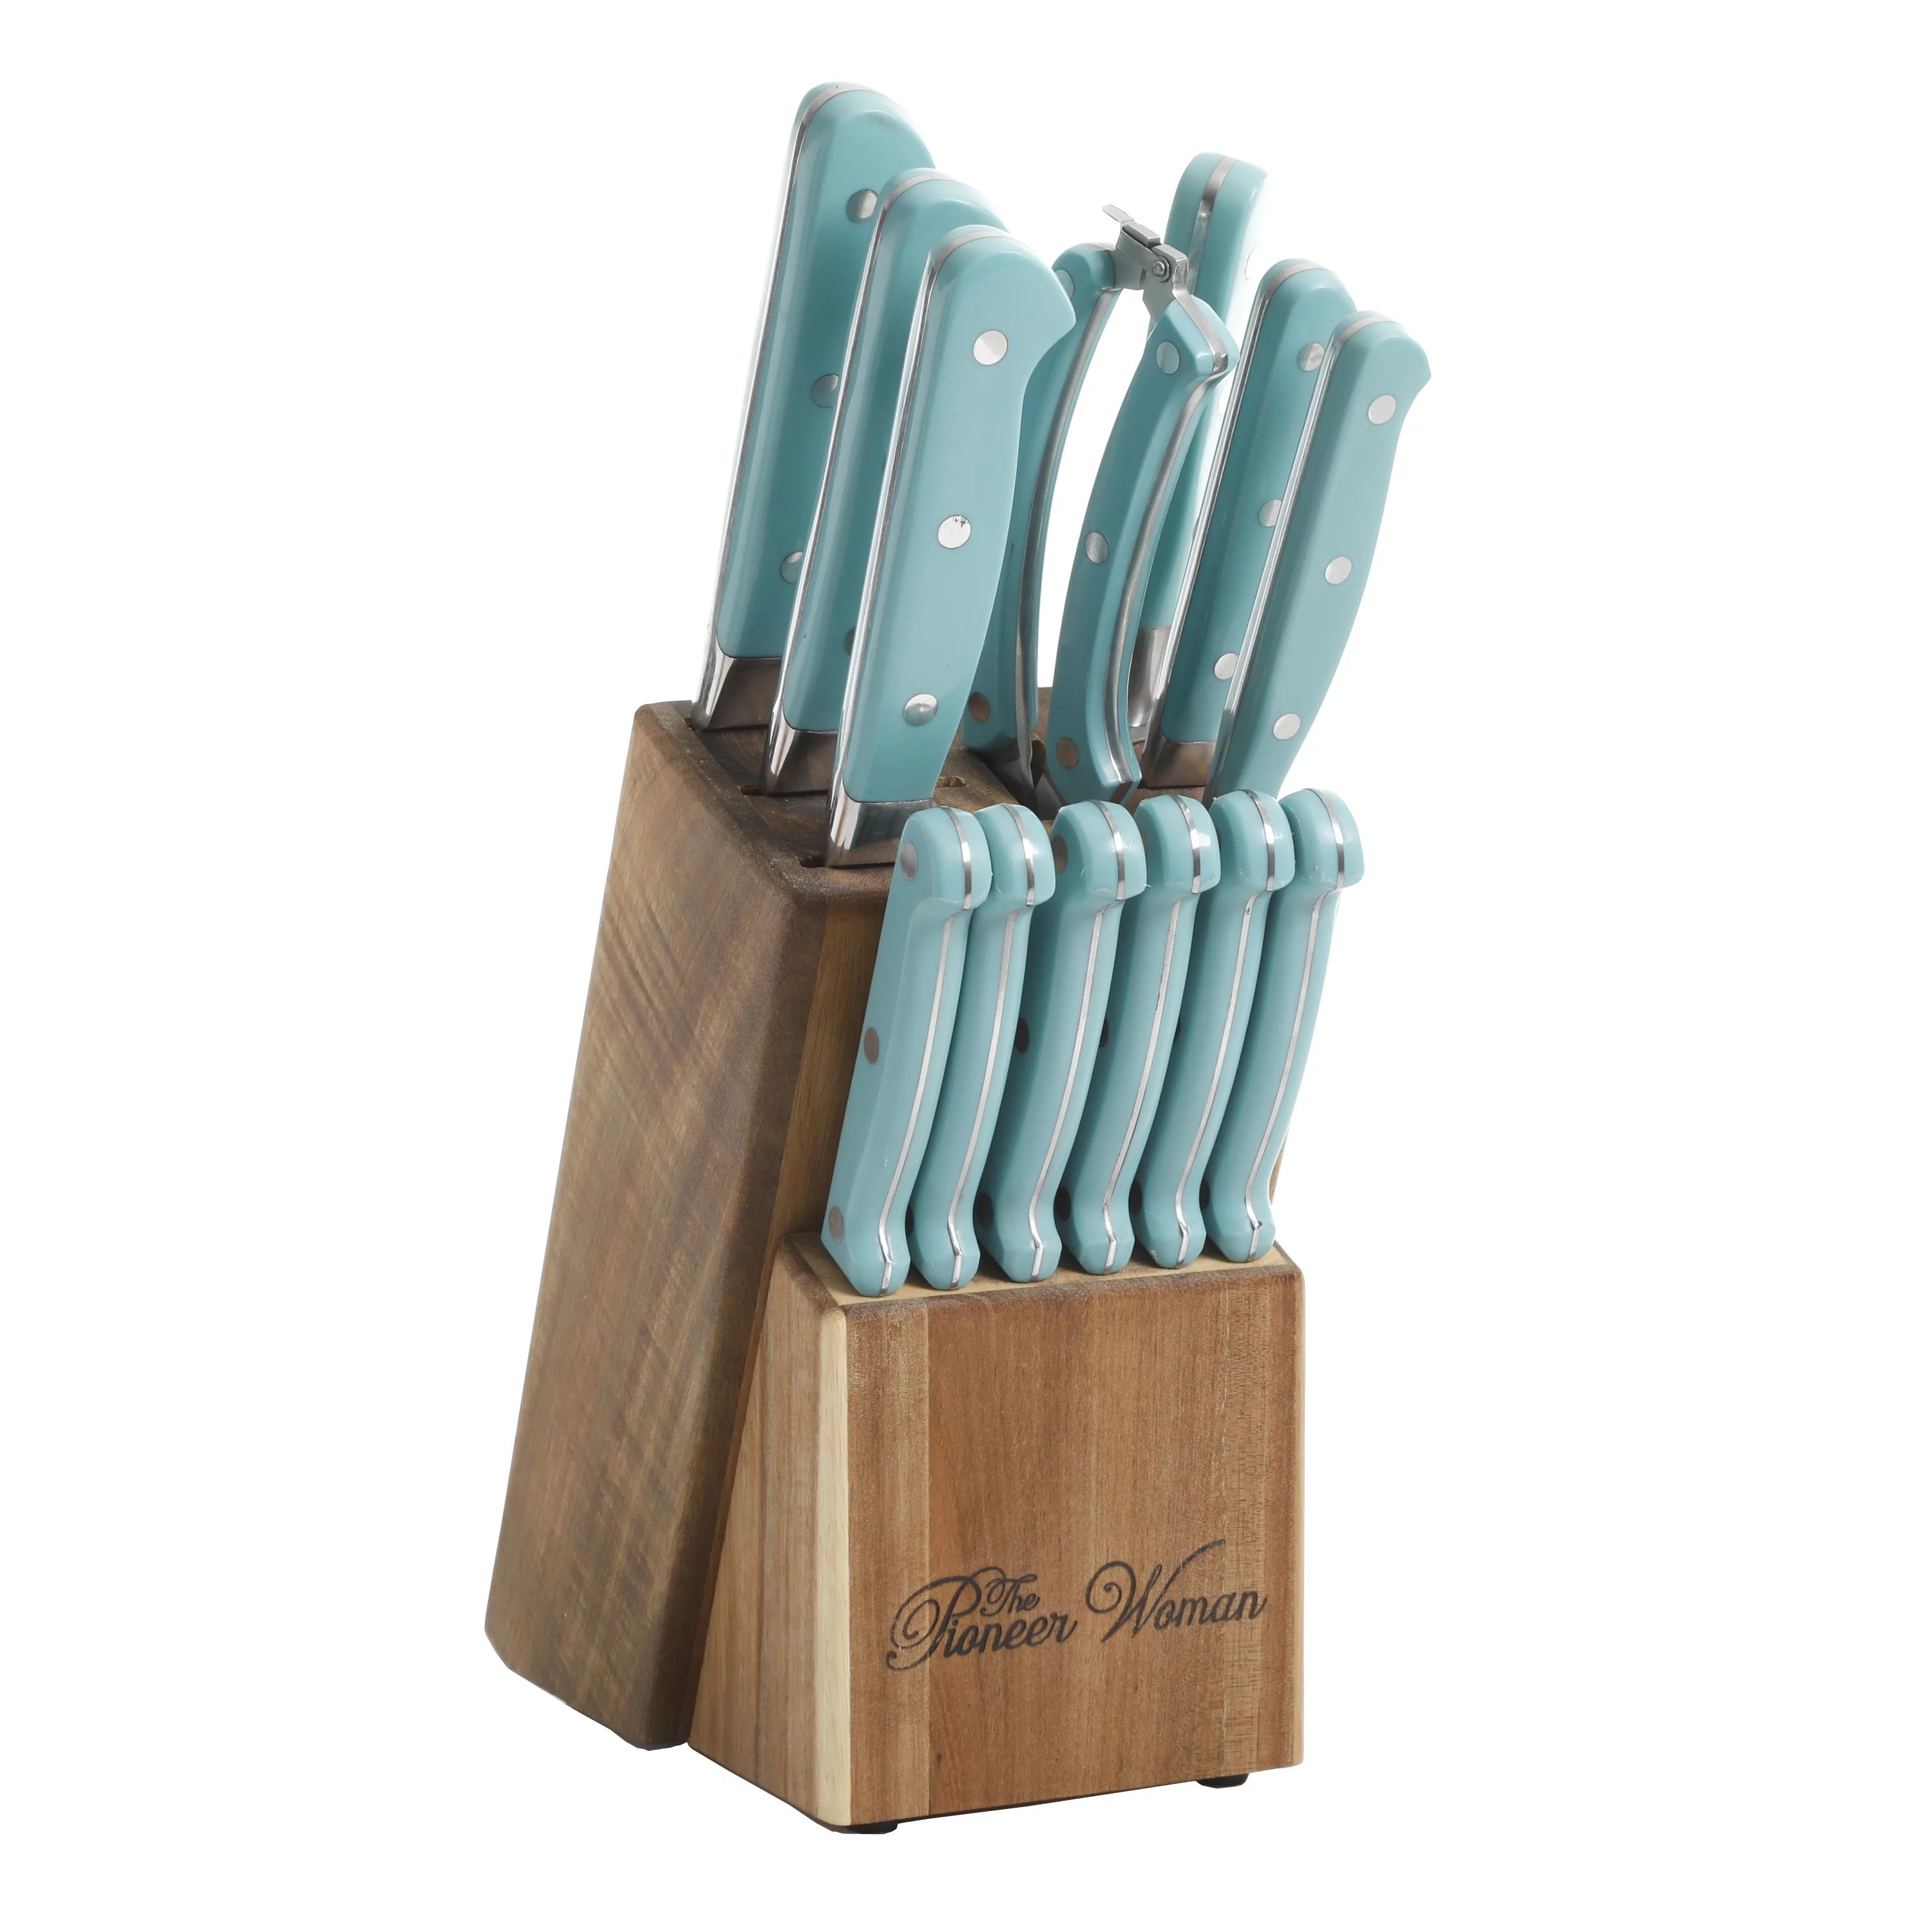 The Pioneer Woman Cowboy Rustic 14-Piece Forged Cutlery Knife Block Set, Turquoise | Walmart (US)